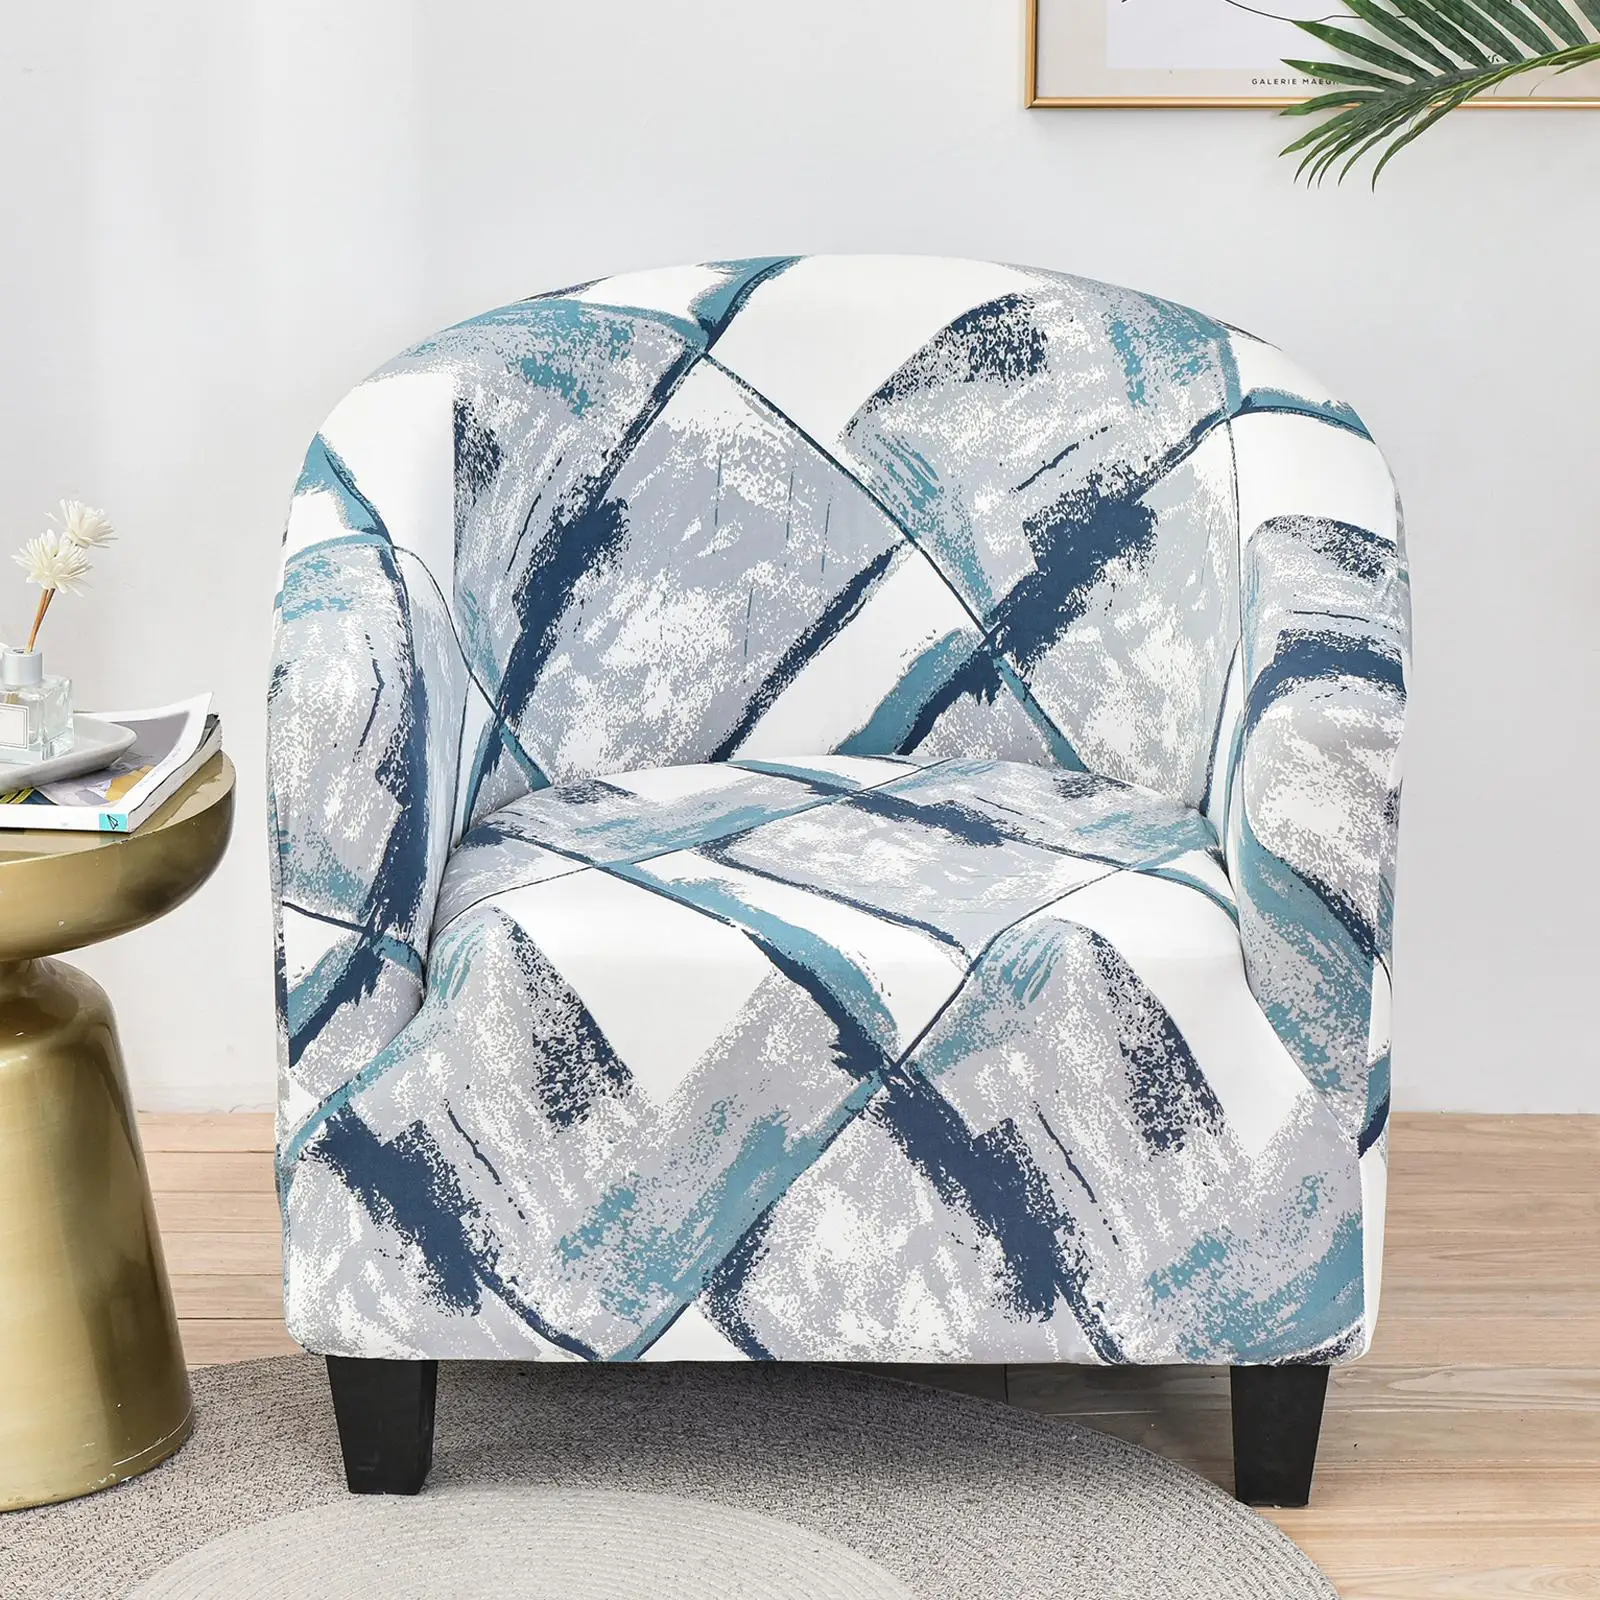 Stretchable Armchair Slipcovers Seat Covers Sofa Couch Cover for Home Hotel Bedroom